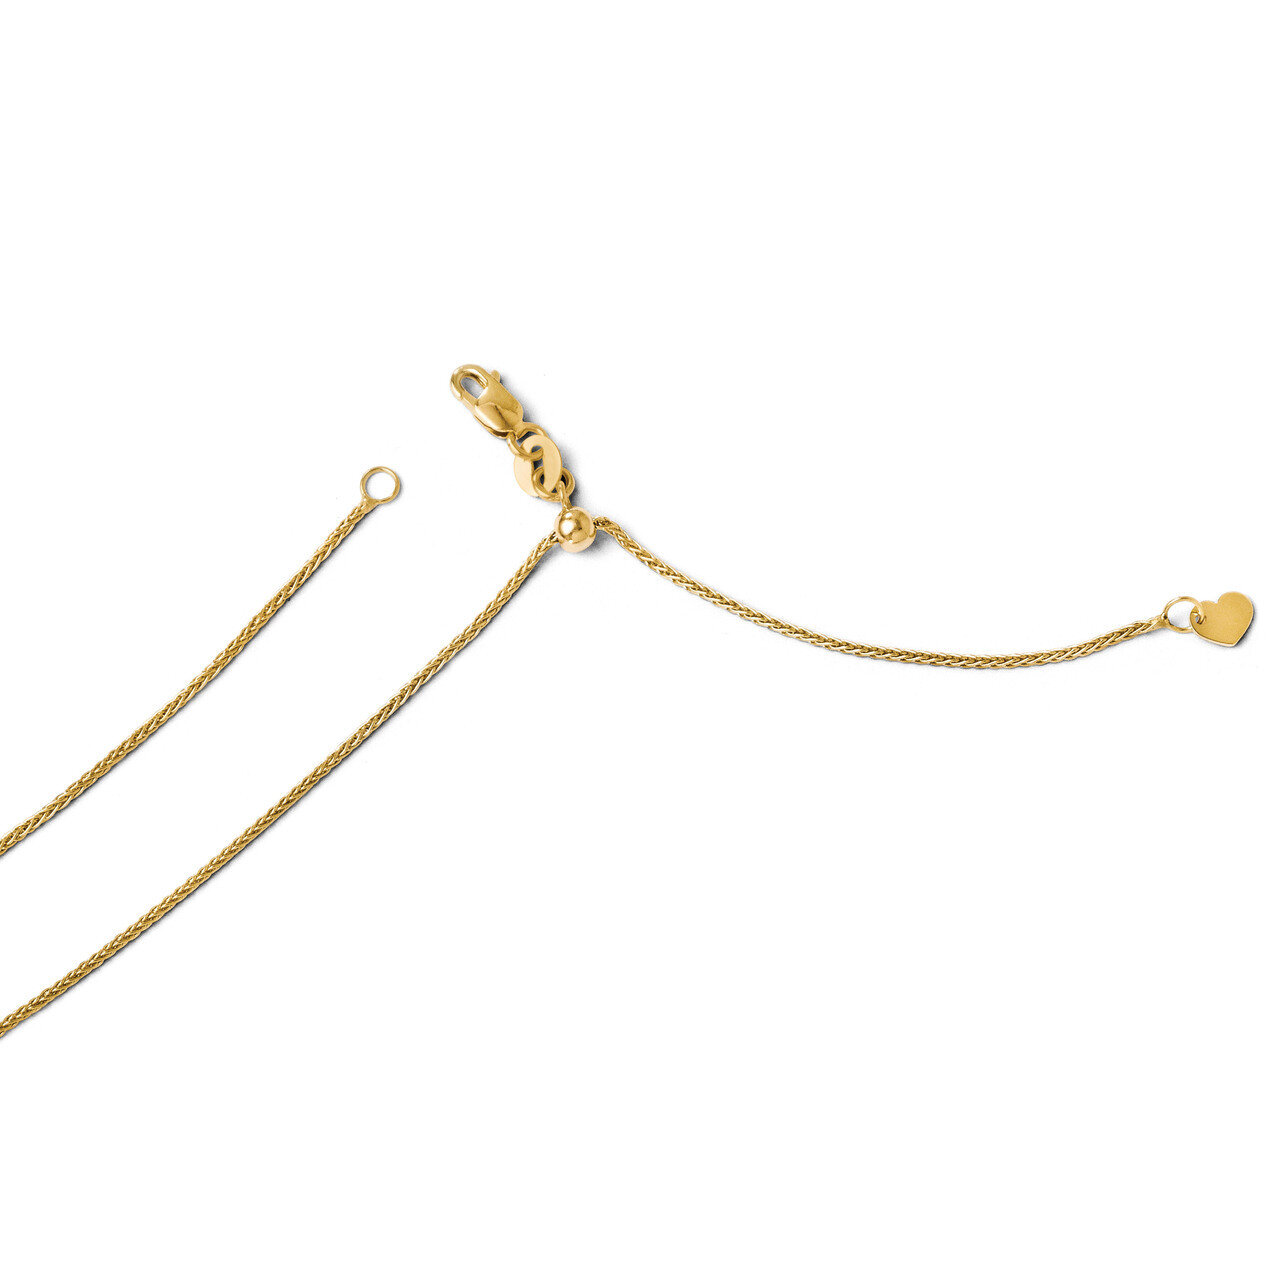 Adjustable Wheat Chain 22 Inch - 14k Gold HB-3103-22